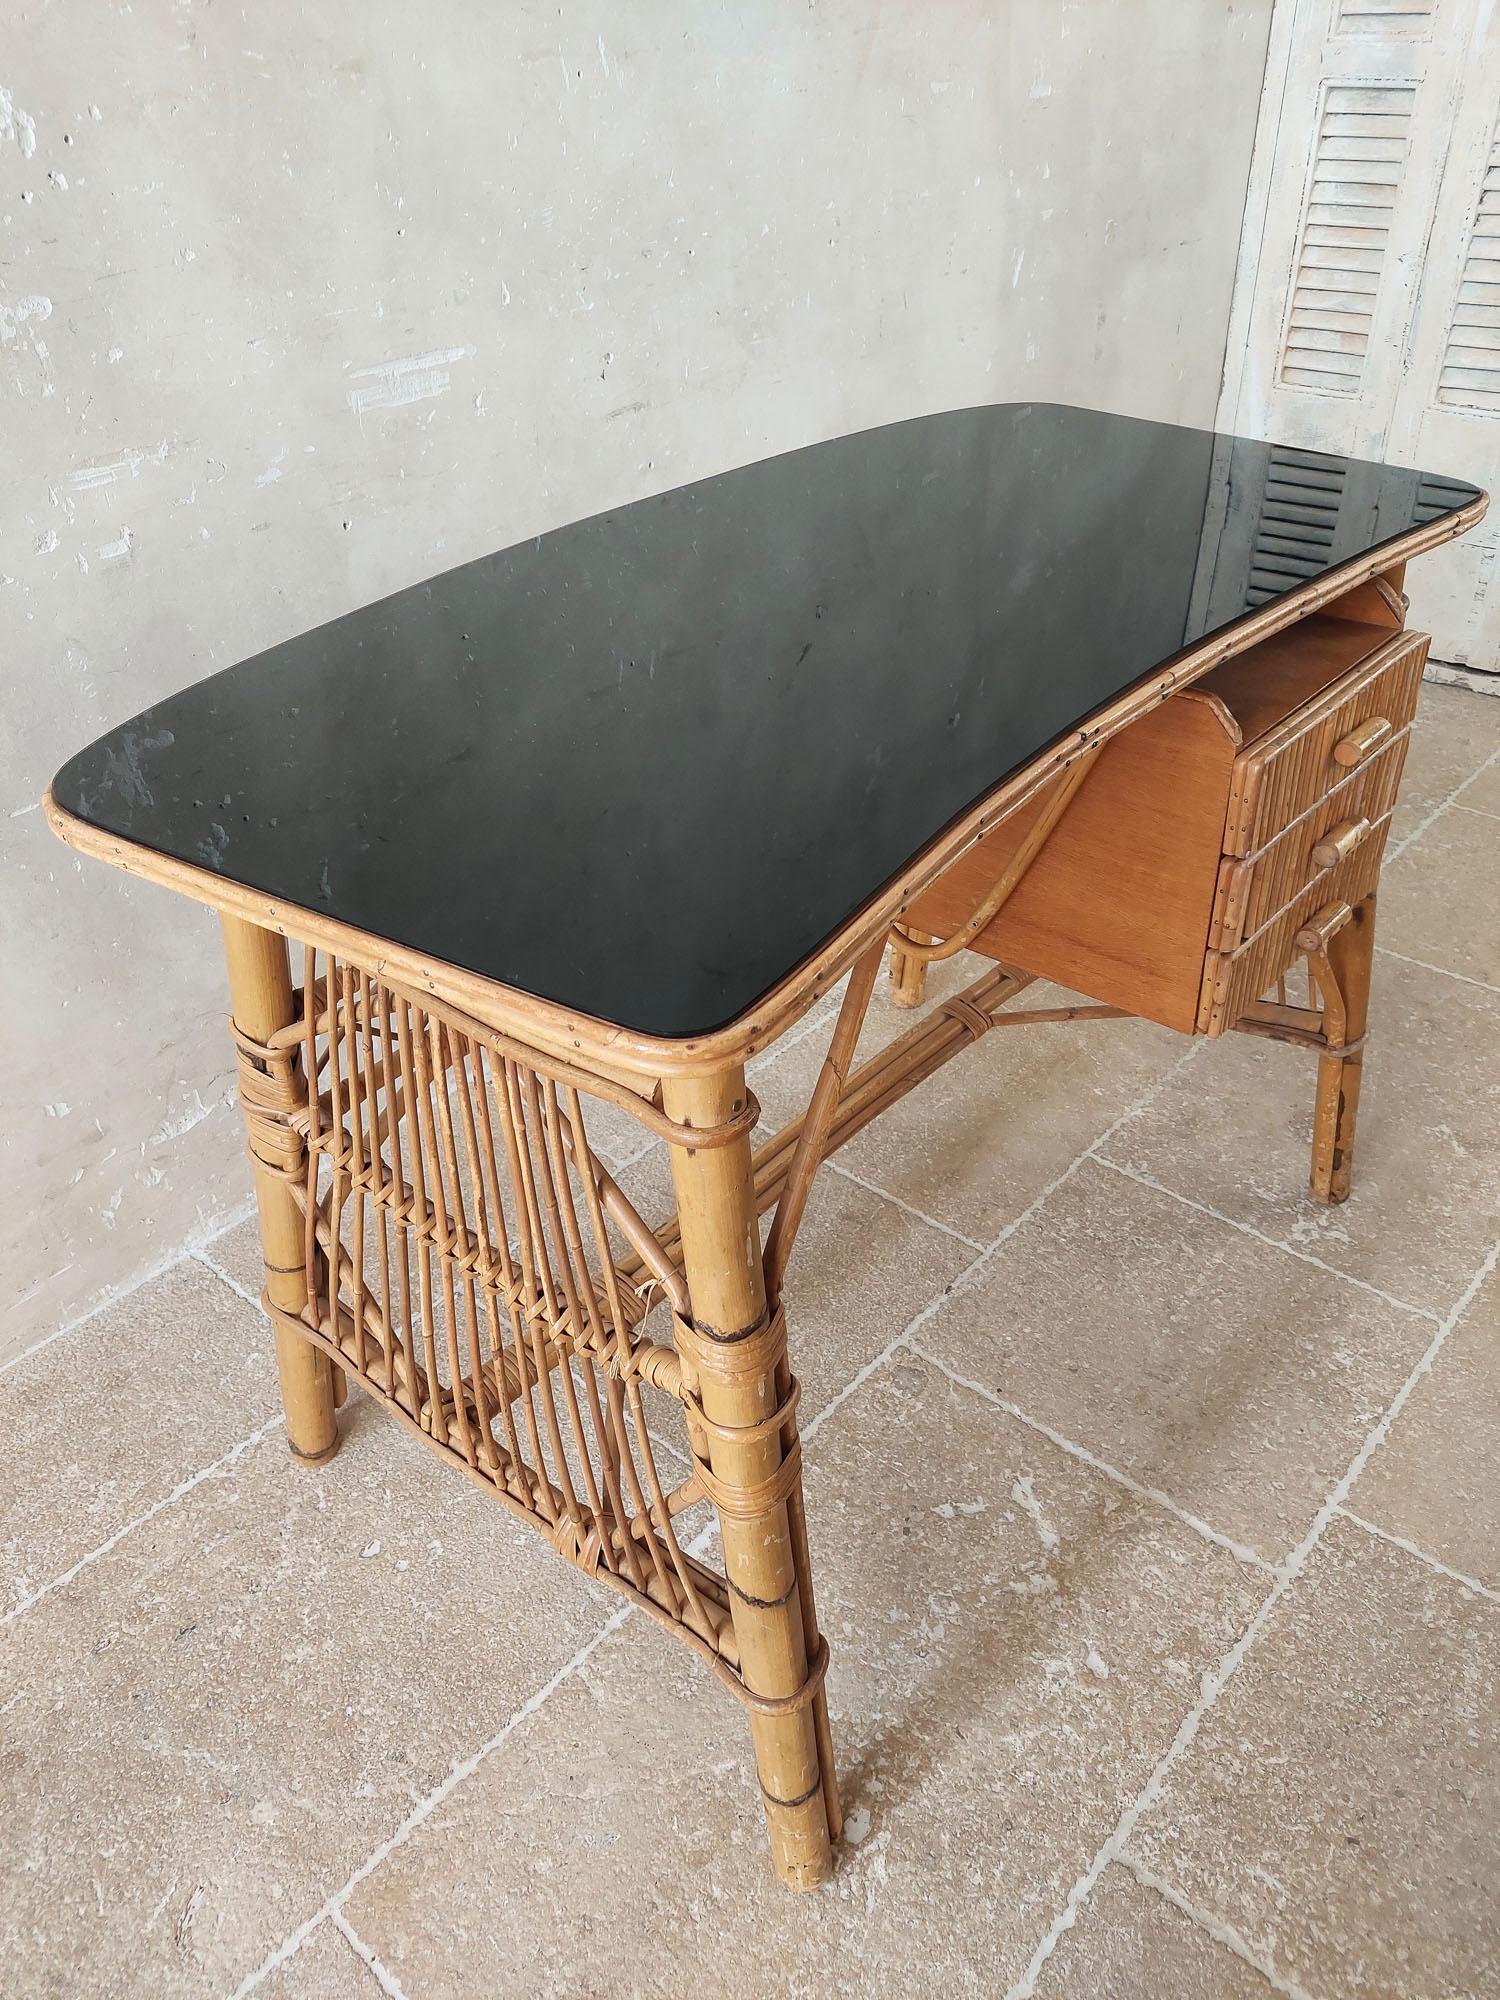 Vintage rattan and bamboo desk. An attractive rattan writing table with three drawers and a slightly rounded black glass top.

h 76 x w 110 x 60 cm